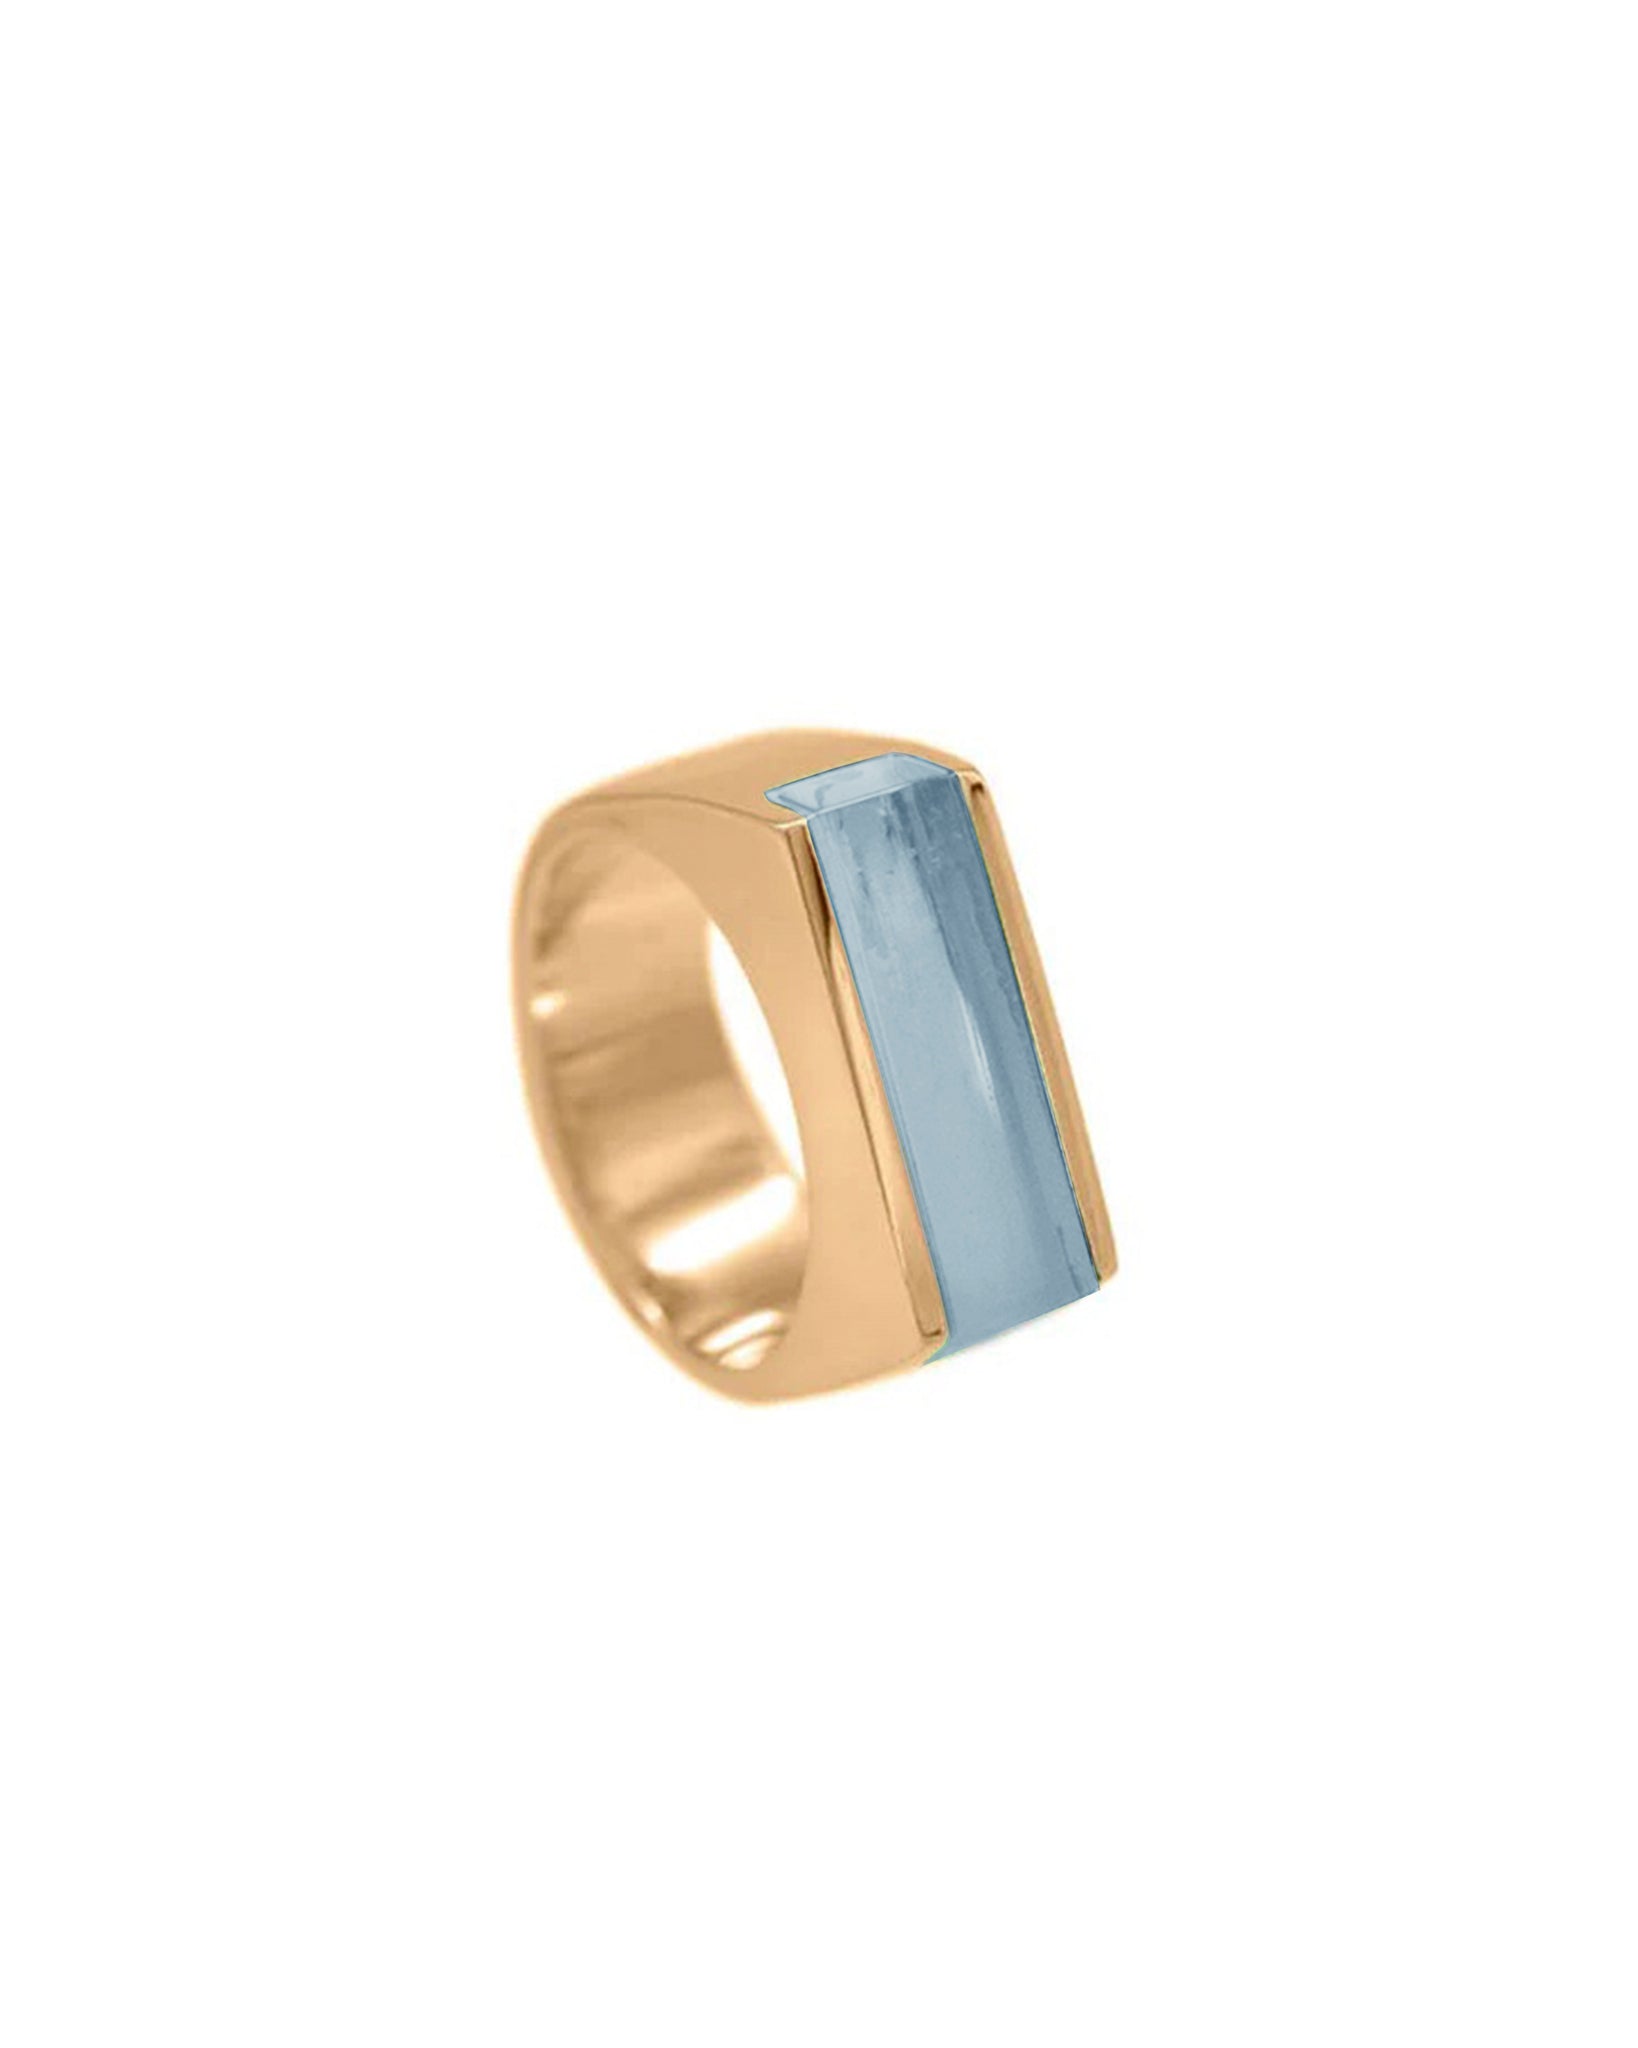 AA Ring - Gold Plated